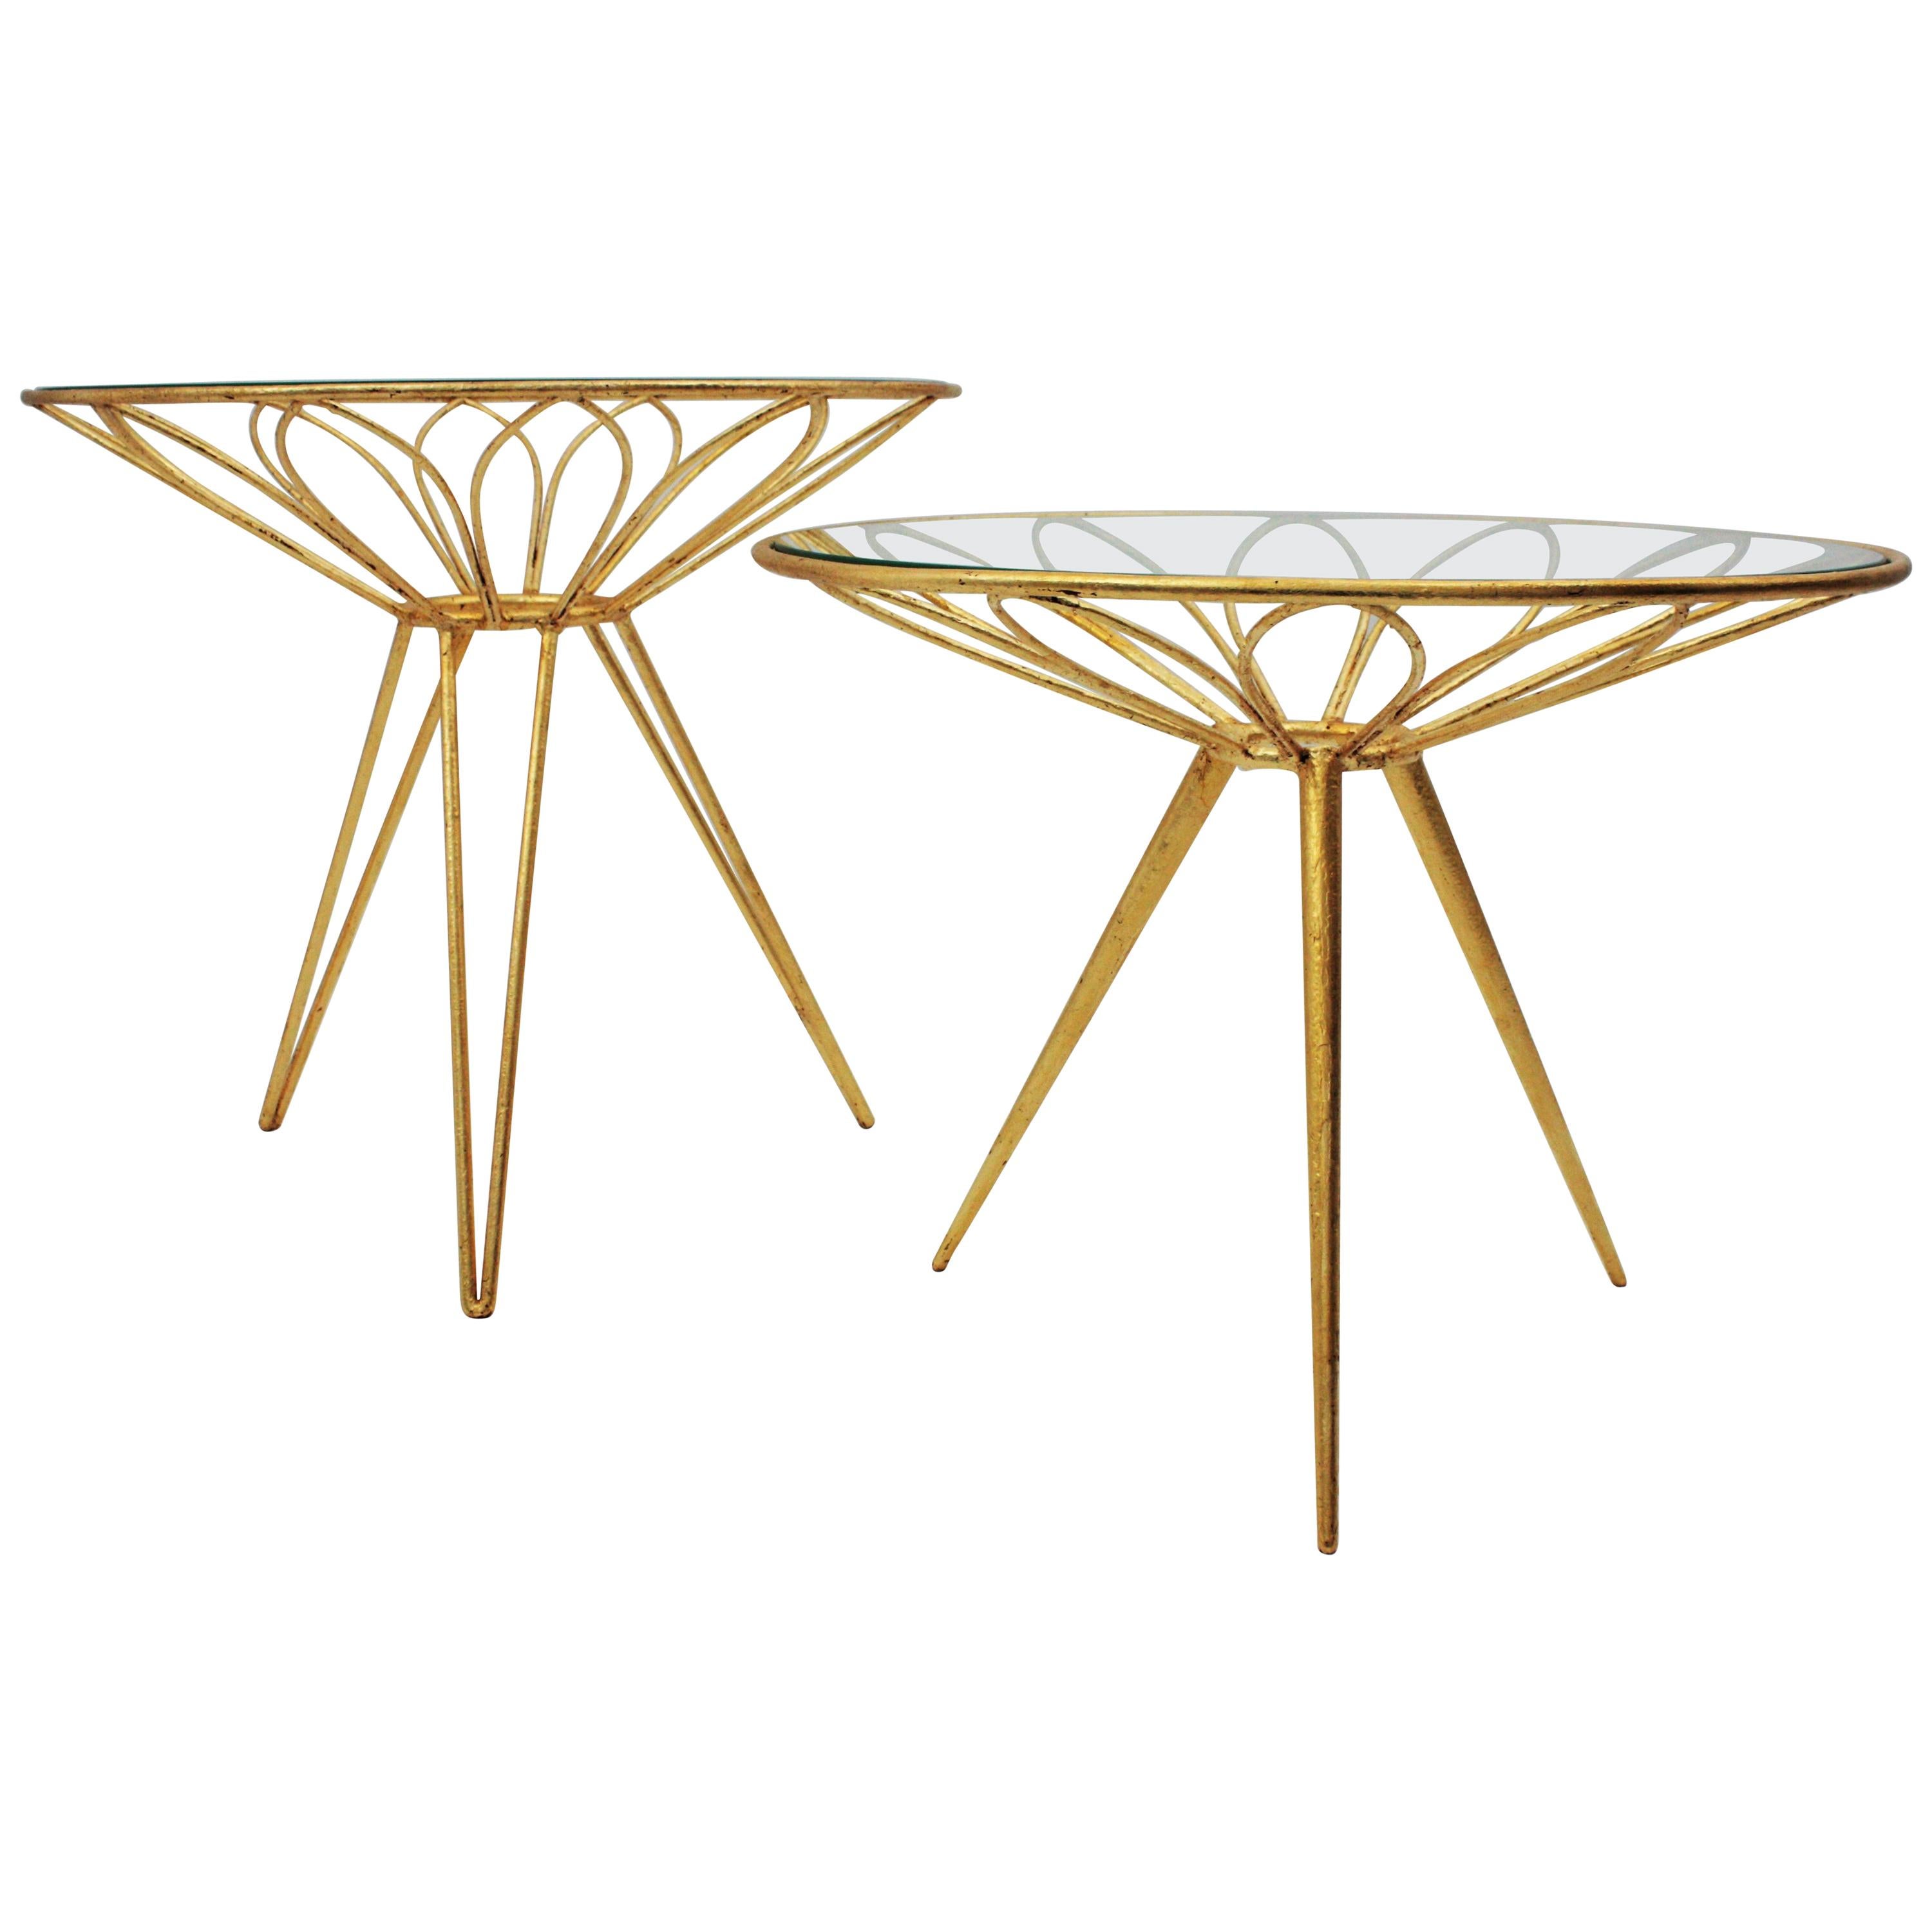 Set of two Midcentury Hollywood Regency daisy flower gilt iron coffee tables, France, 1950s.
A set of two glamorous gold leaf gilt iron occasional tables with glass round tops standing on tripod bases.
These tables are very similar in design. The